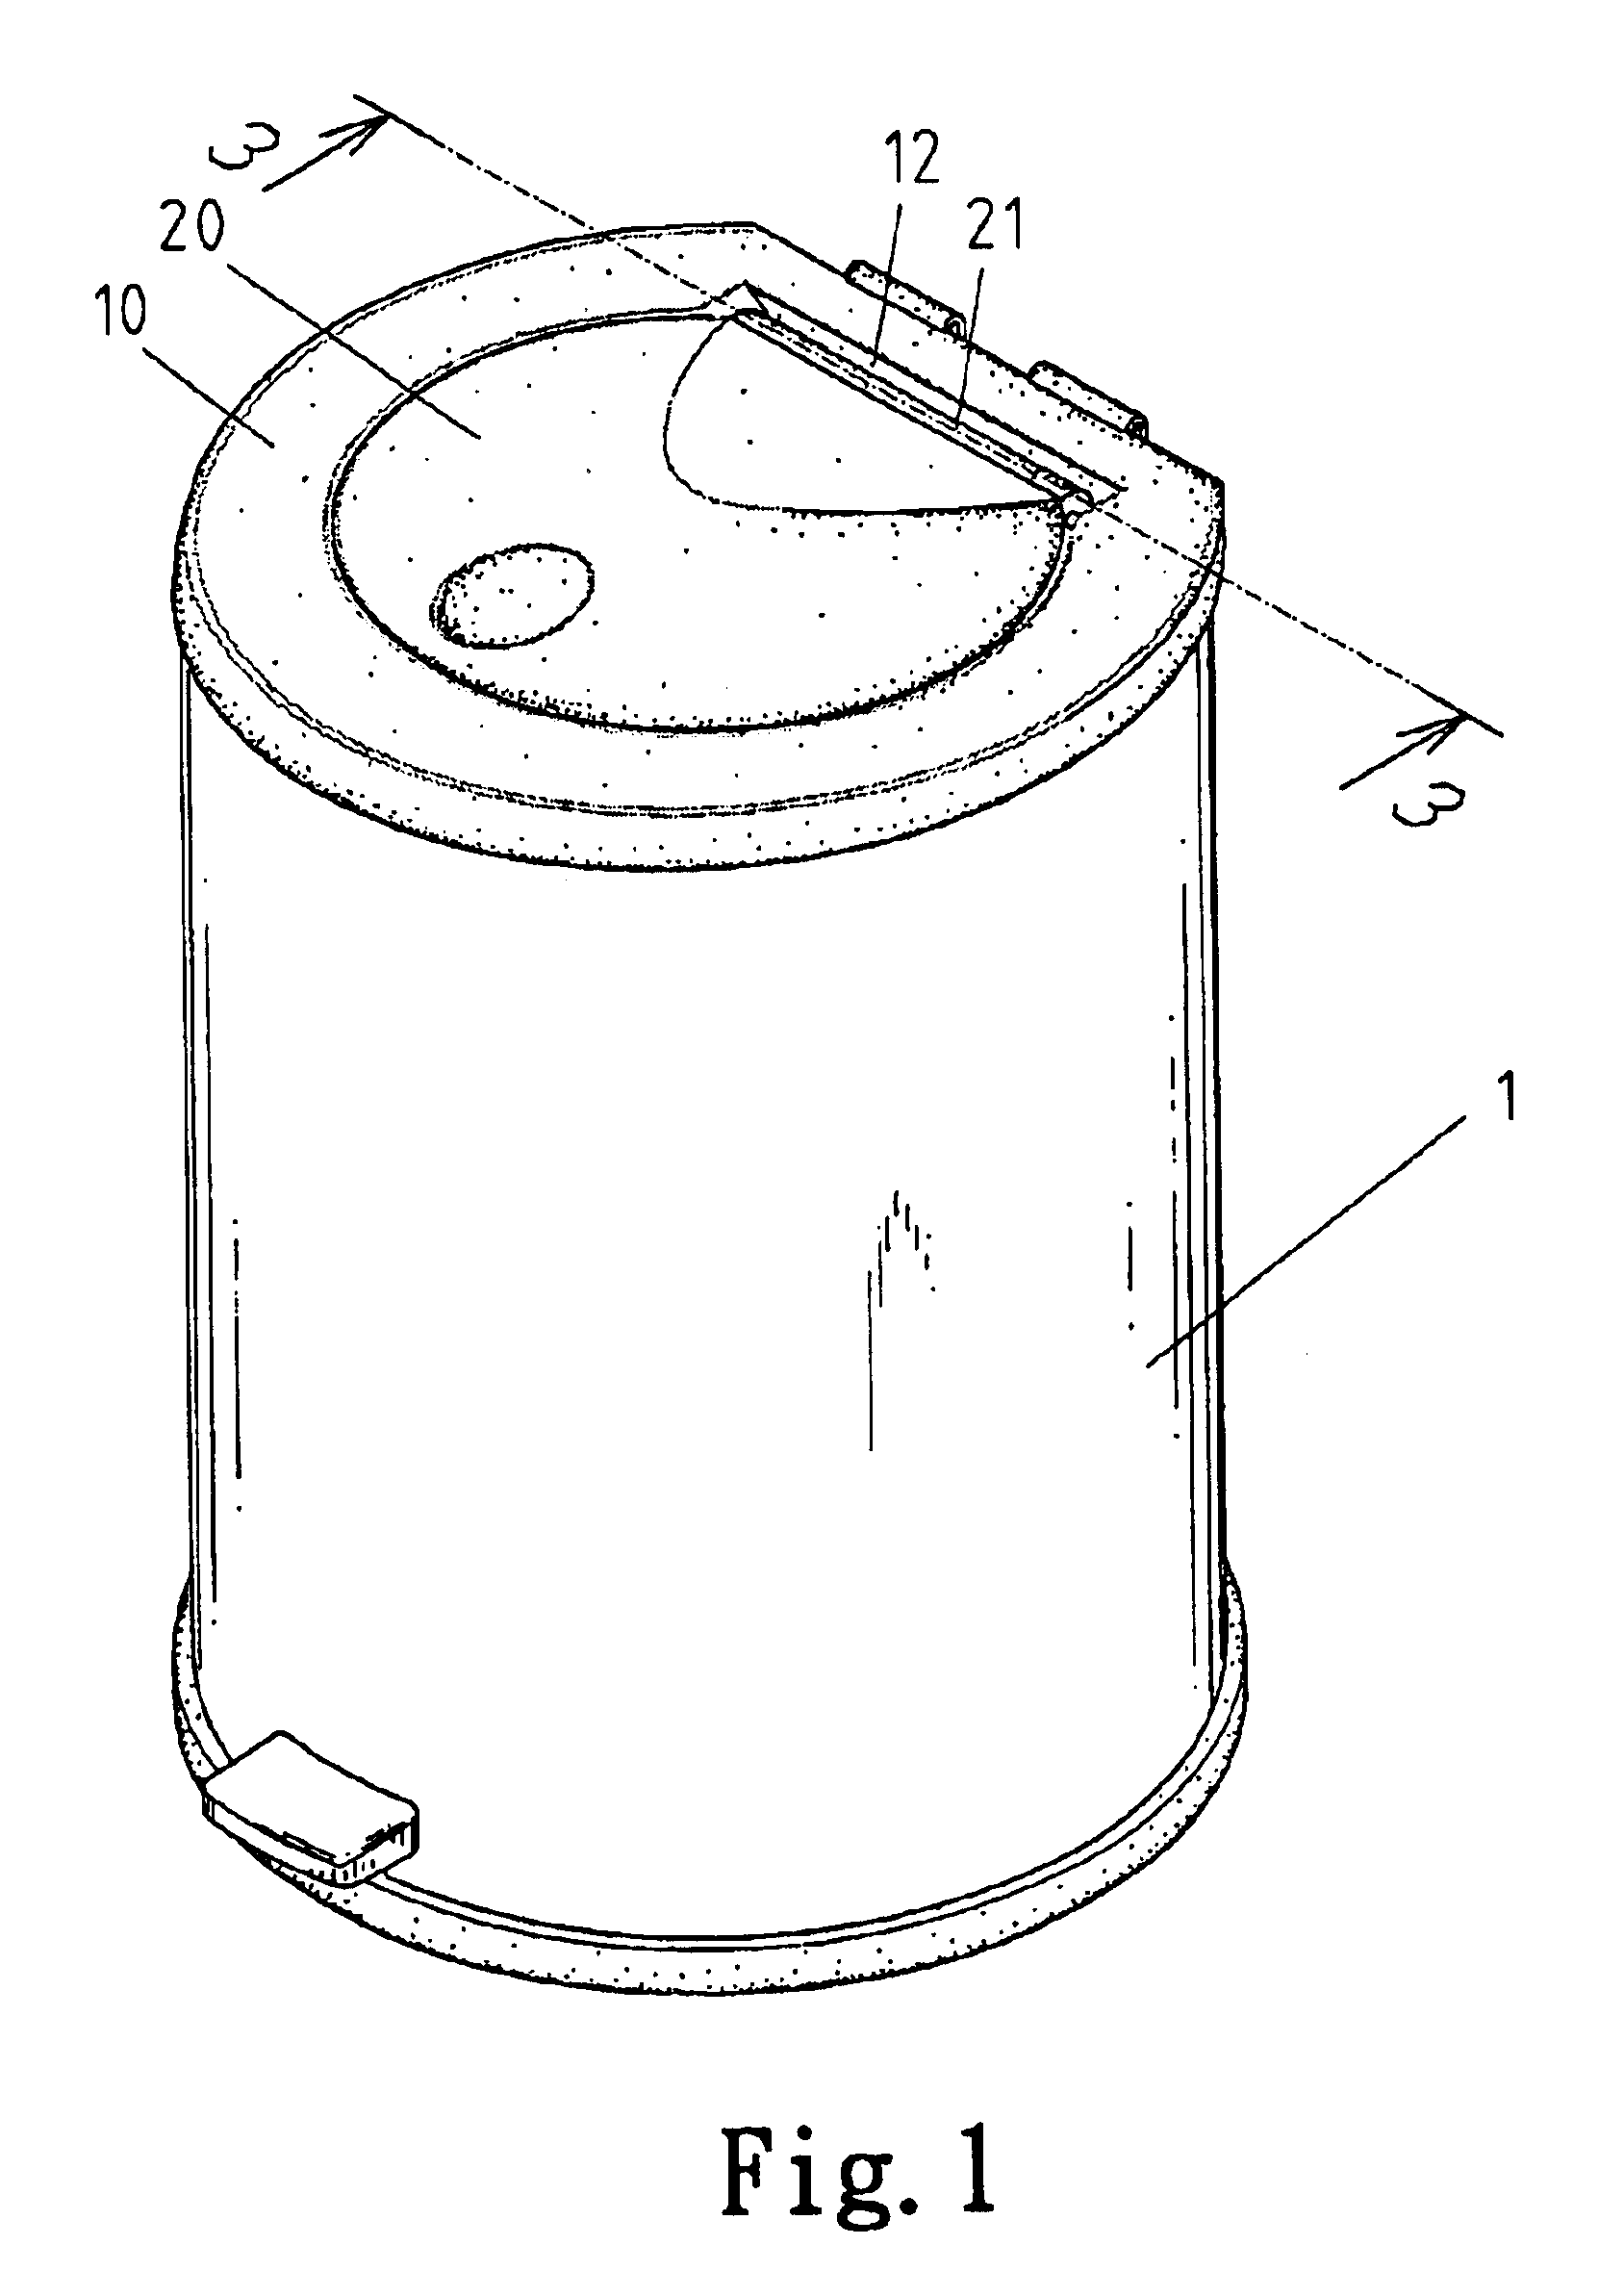 Garbage bin with cover